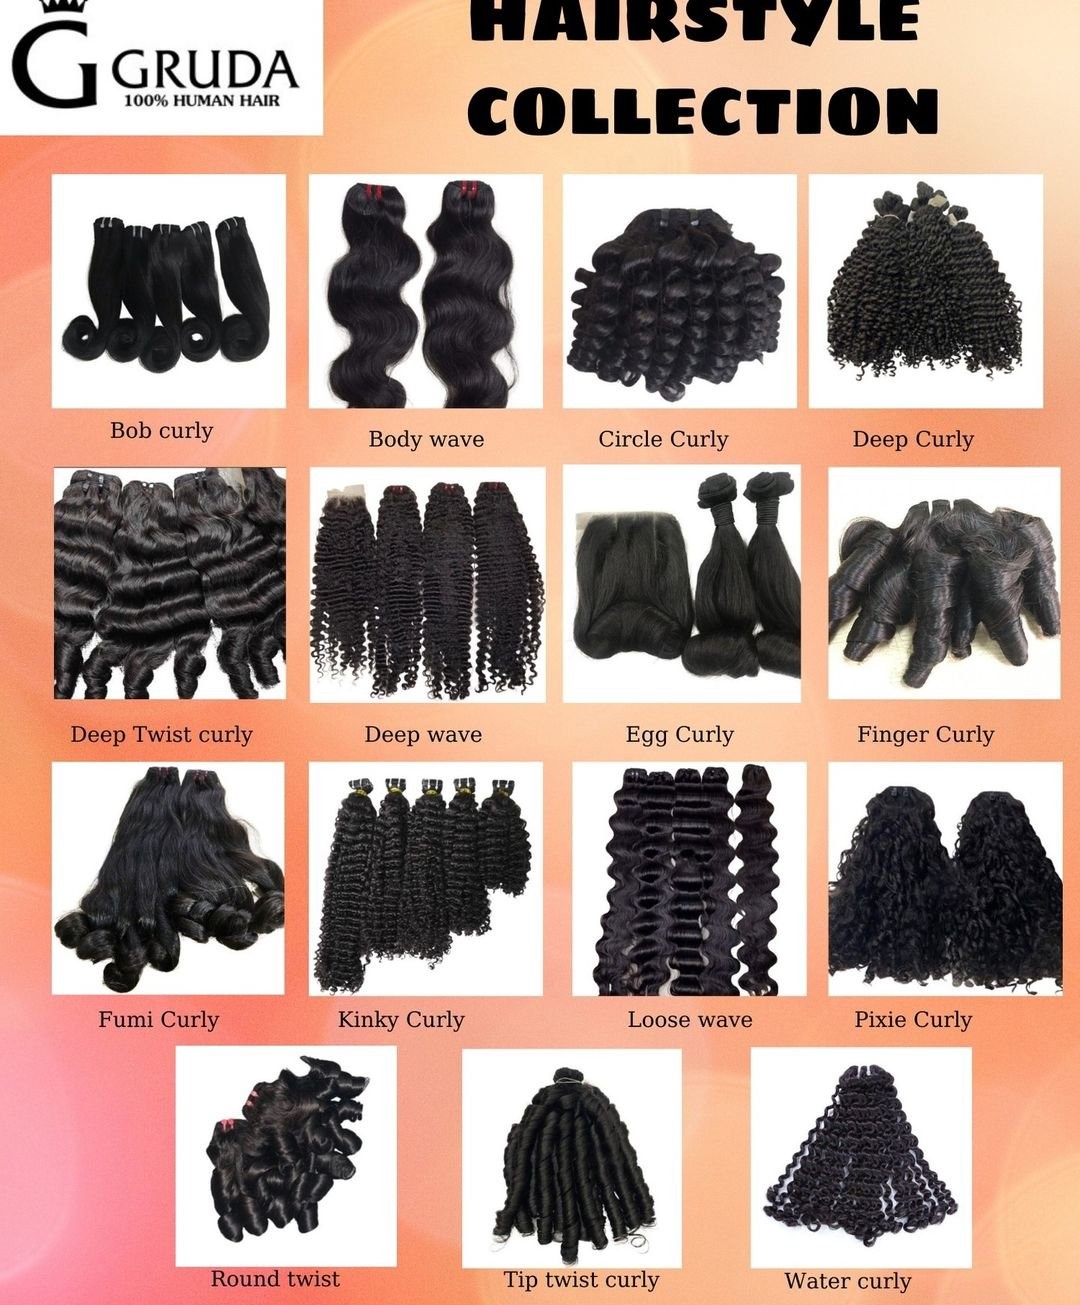 hairstyles of hair extension in Gruda